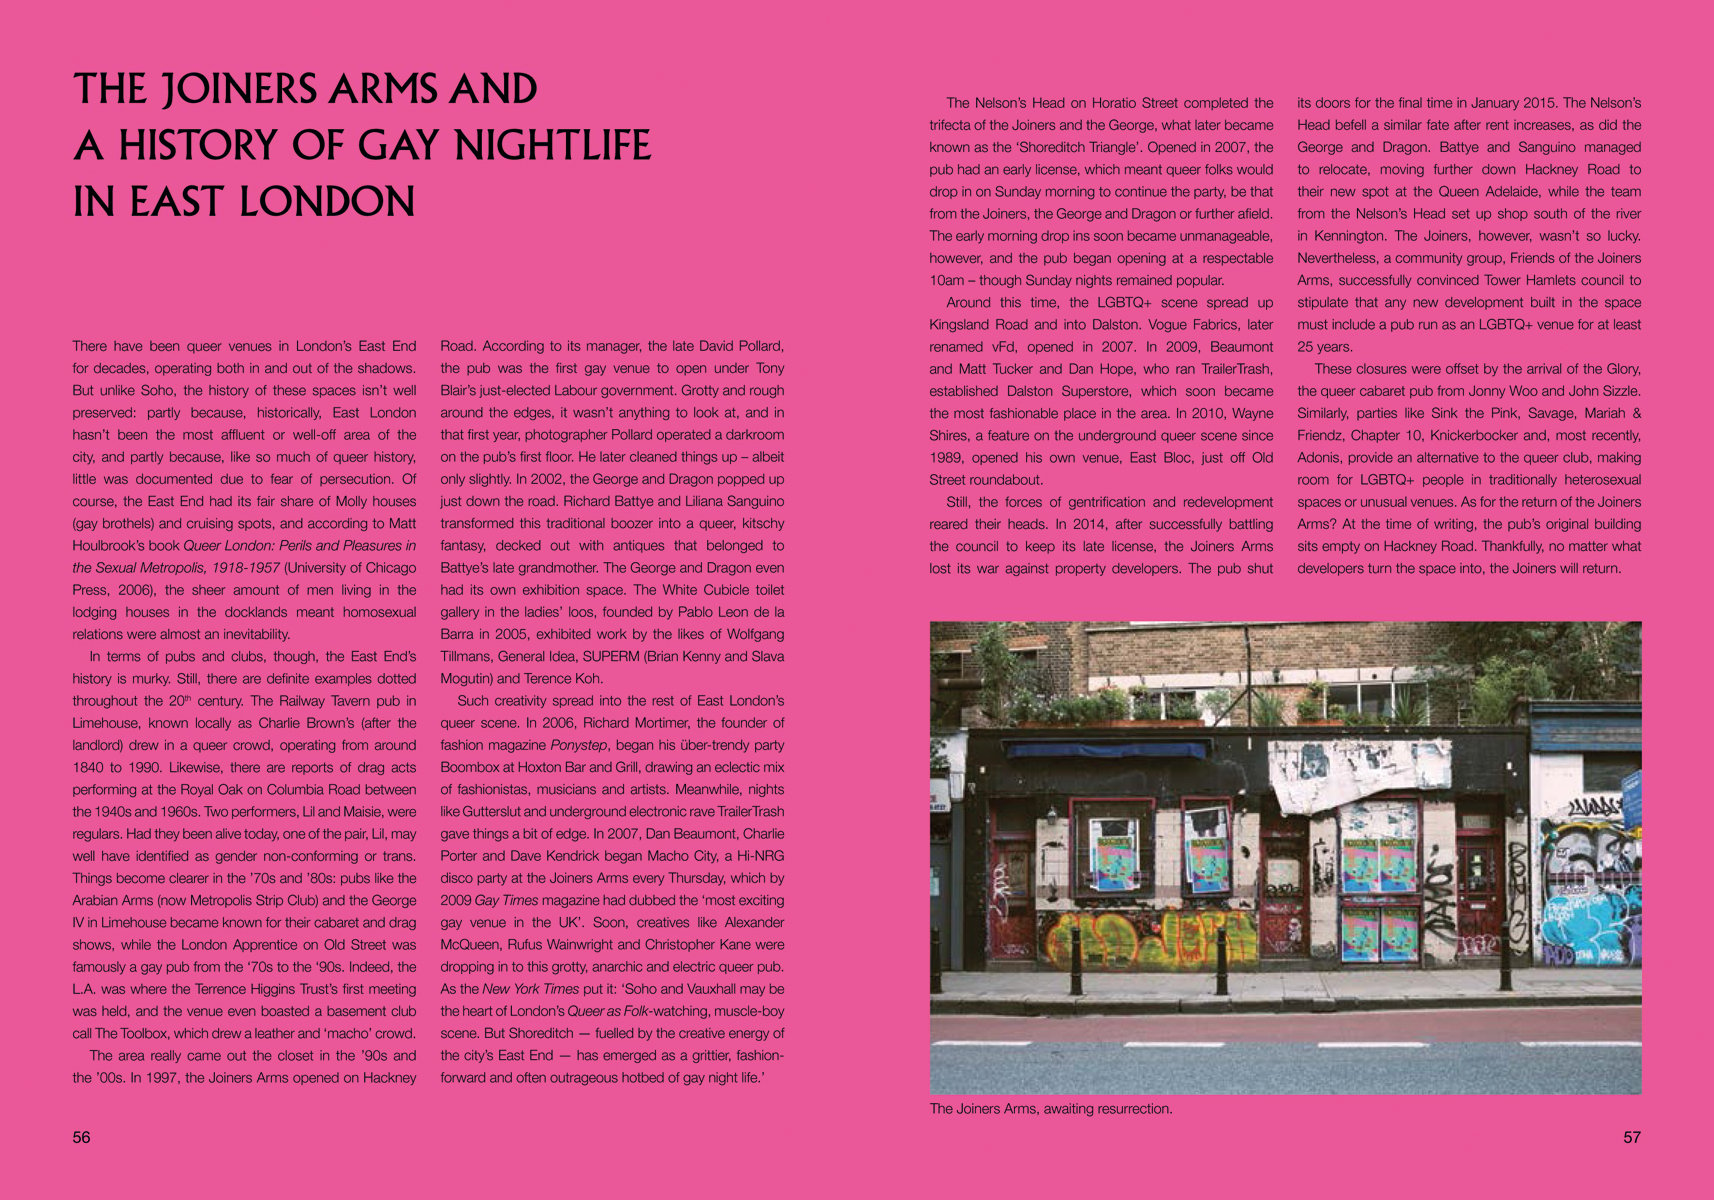 LGBT rainbow flag to top edge of brick building, QUEER LONDON in black font on pink cover above, by ACC Art Books.